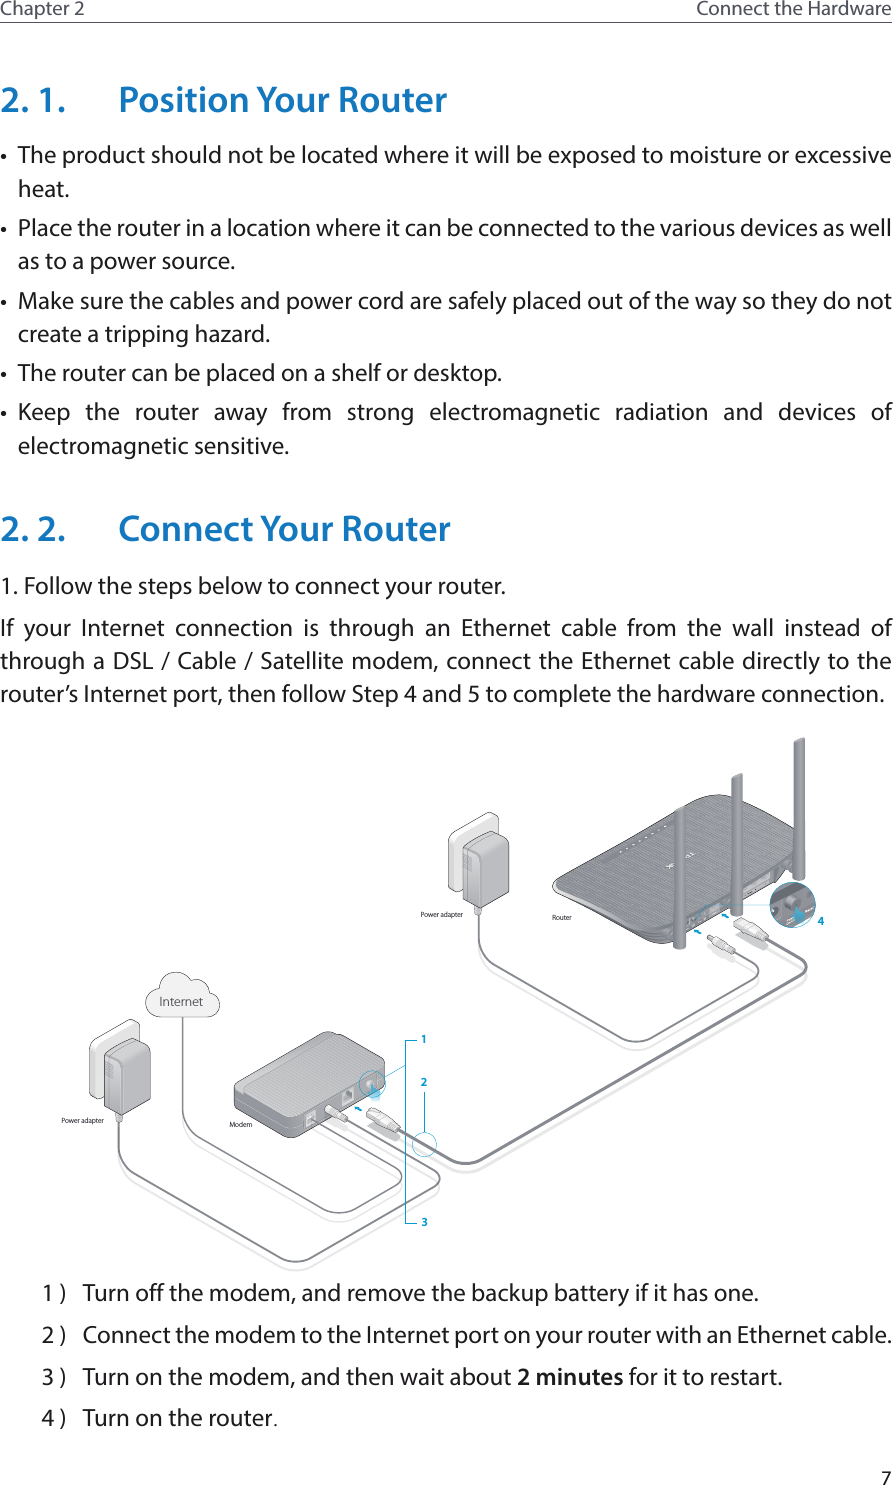 7Chapter 2 Connect the Hardware2. 1.  Position Your Router•  The product should not be located where it will be exposed to moisture or excessive heat.•  Place the router in a location where it can be connected to the various devices as well as to a power source.•  Make sure the cables and power cord are safely placed out of the way so they do not create a tripping hazard.•  The router can be placed on a shelf or desktop.•  Keep the router away from strong electromagnetic radiation and devices of electromagnetic sensitive.2. 2.  Connect Your Router1. Follow the steps below to connect your router.If your Internet connection is through an Ethernet cable from the wall instead of through a DSL / Cable / Satellite modem, connect the Ethernet cable directly to the router’s Internet port, then follow Step 4 and 5 to complete the hardware connection.Internet132RouterModemPower adapterPower adapter 41 )  Turn off the modem, and remove the backup battery if it has one.2 )  Connect the modem to the Internet port on your router with an Ethernet cable.3 )  Turn on the modem, and then wait about 2 minutes for it to restart.4 )  Turn on the router.